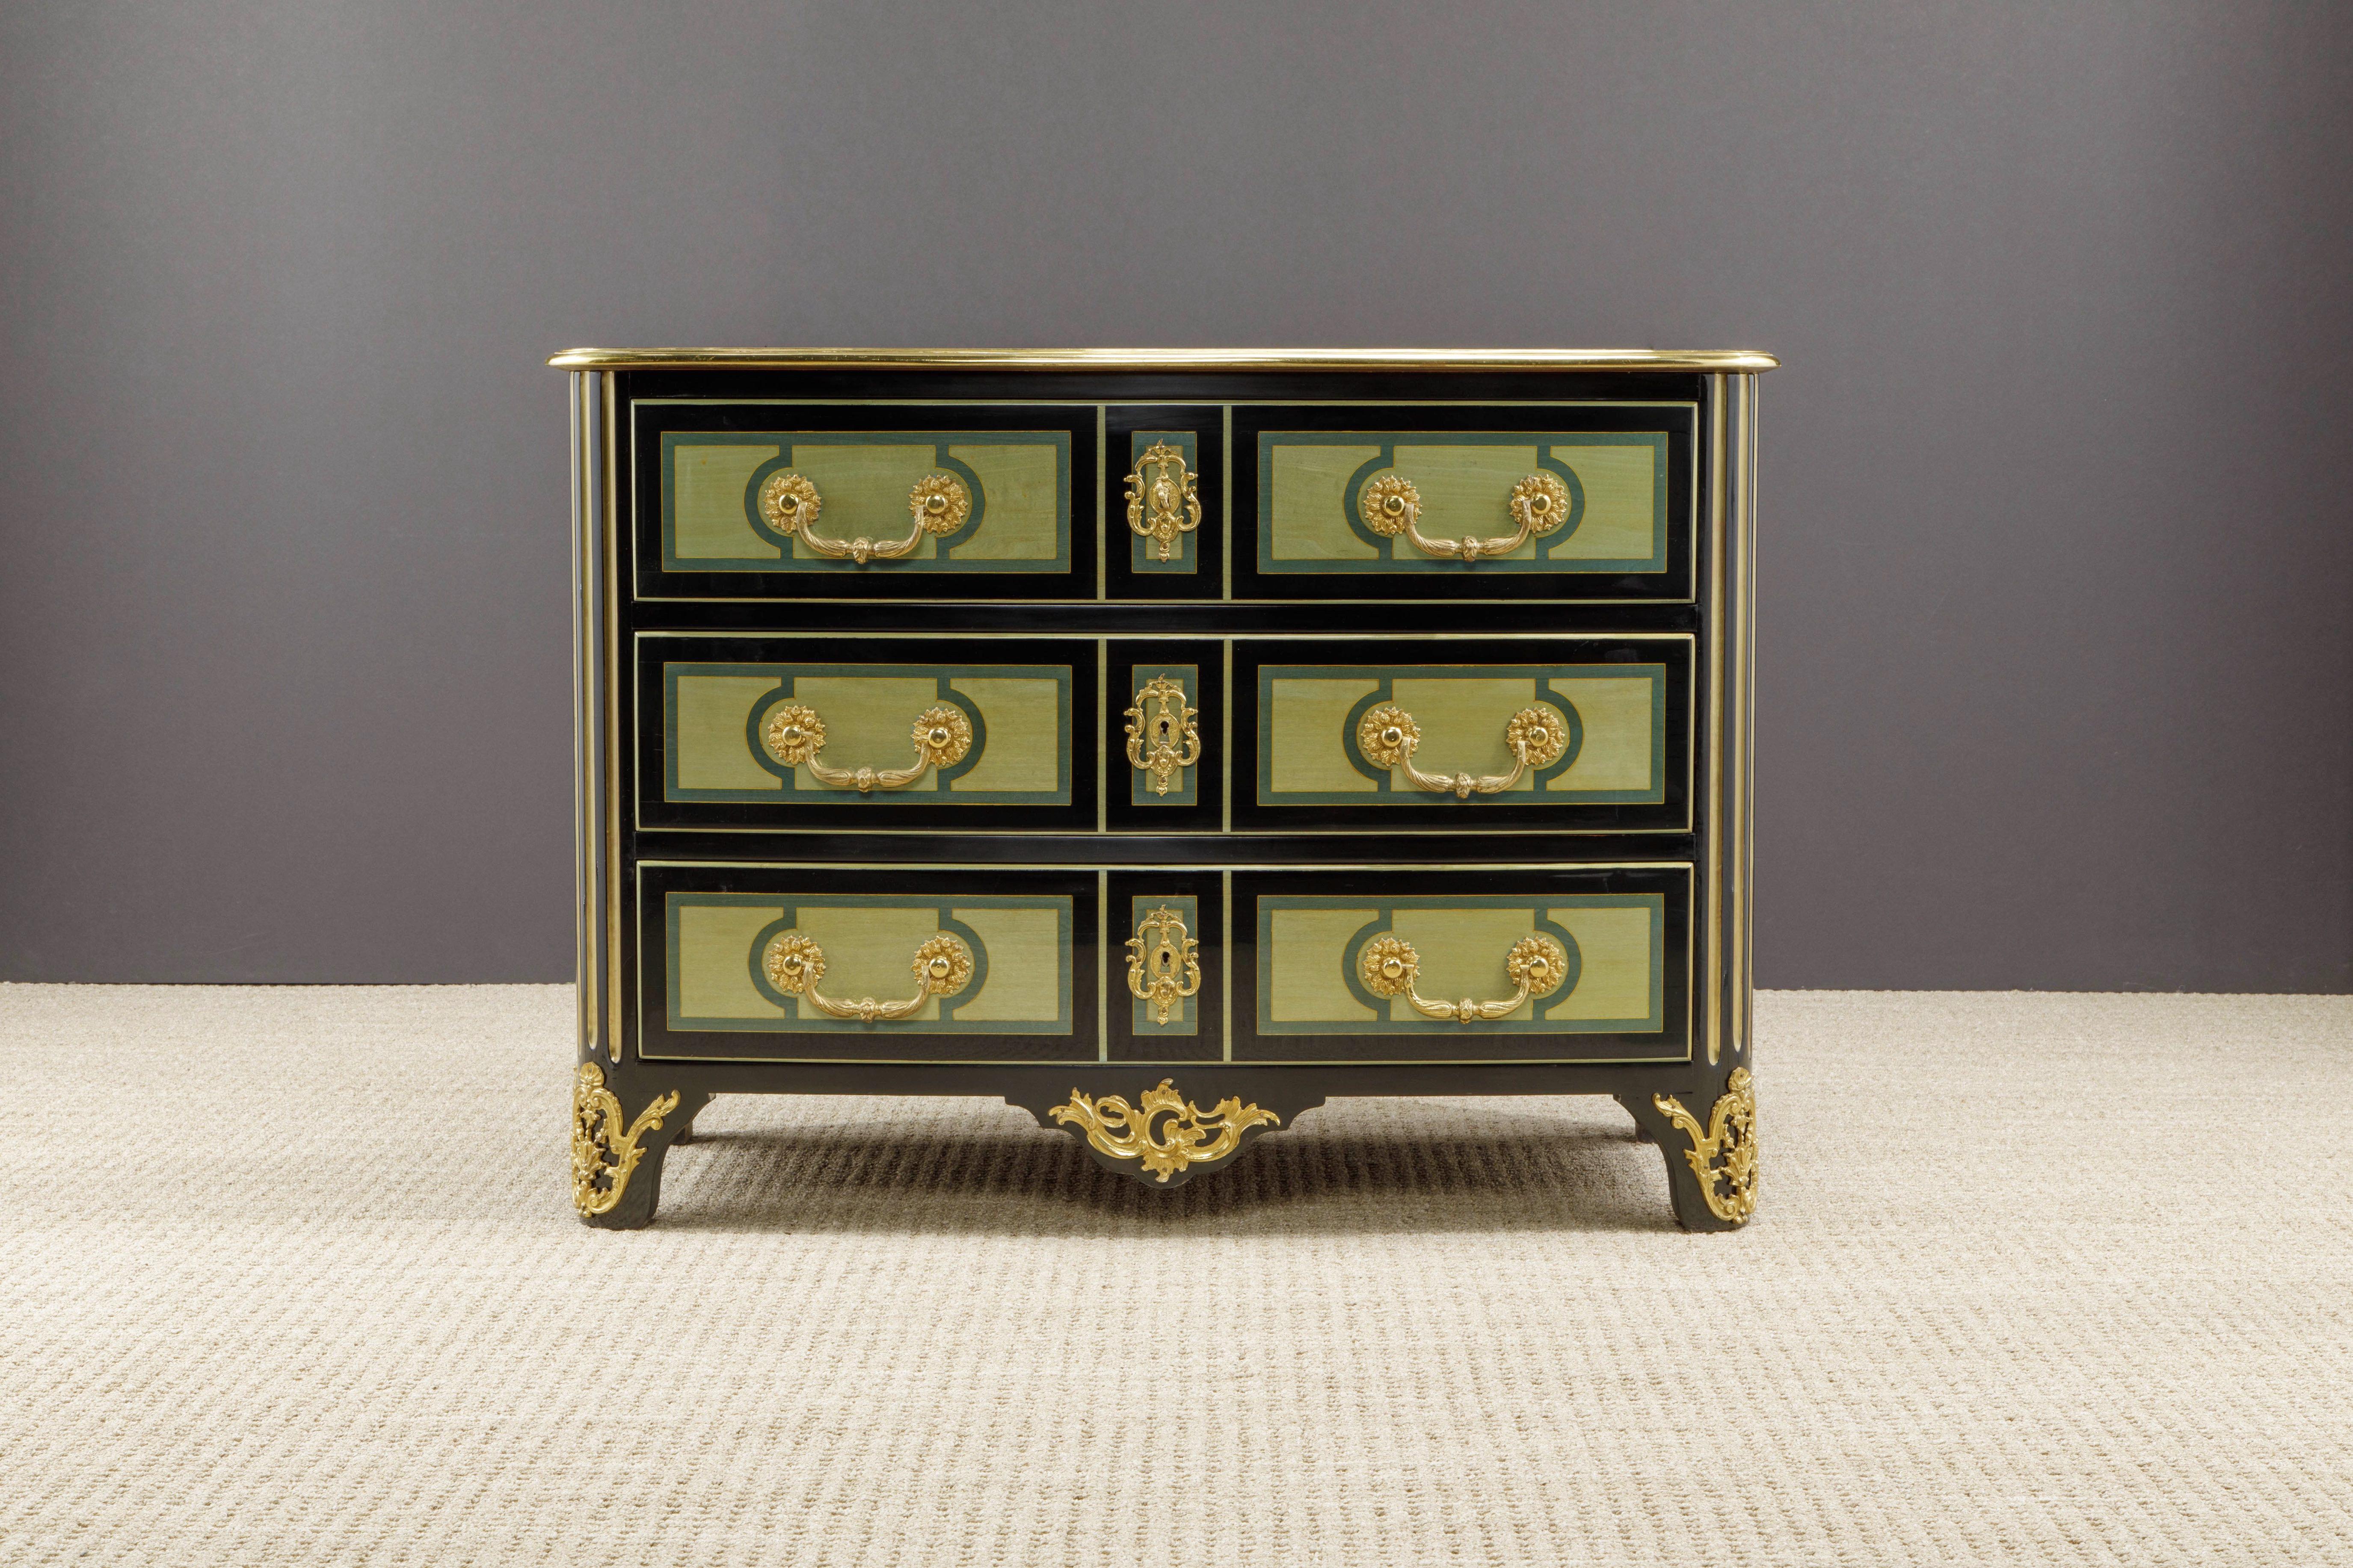 Magnificent and fine Maison Jansen ormolu mounted commode (France, c. 1950), documented in the book 'Jansen Furniture' by James Archer Abbot (see photos). 

This important cabinet was recently imported from the UK and was lightly restored here in